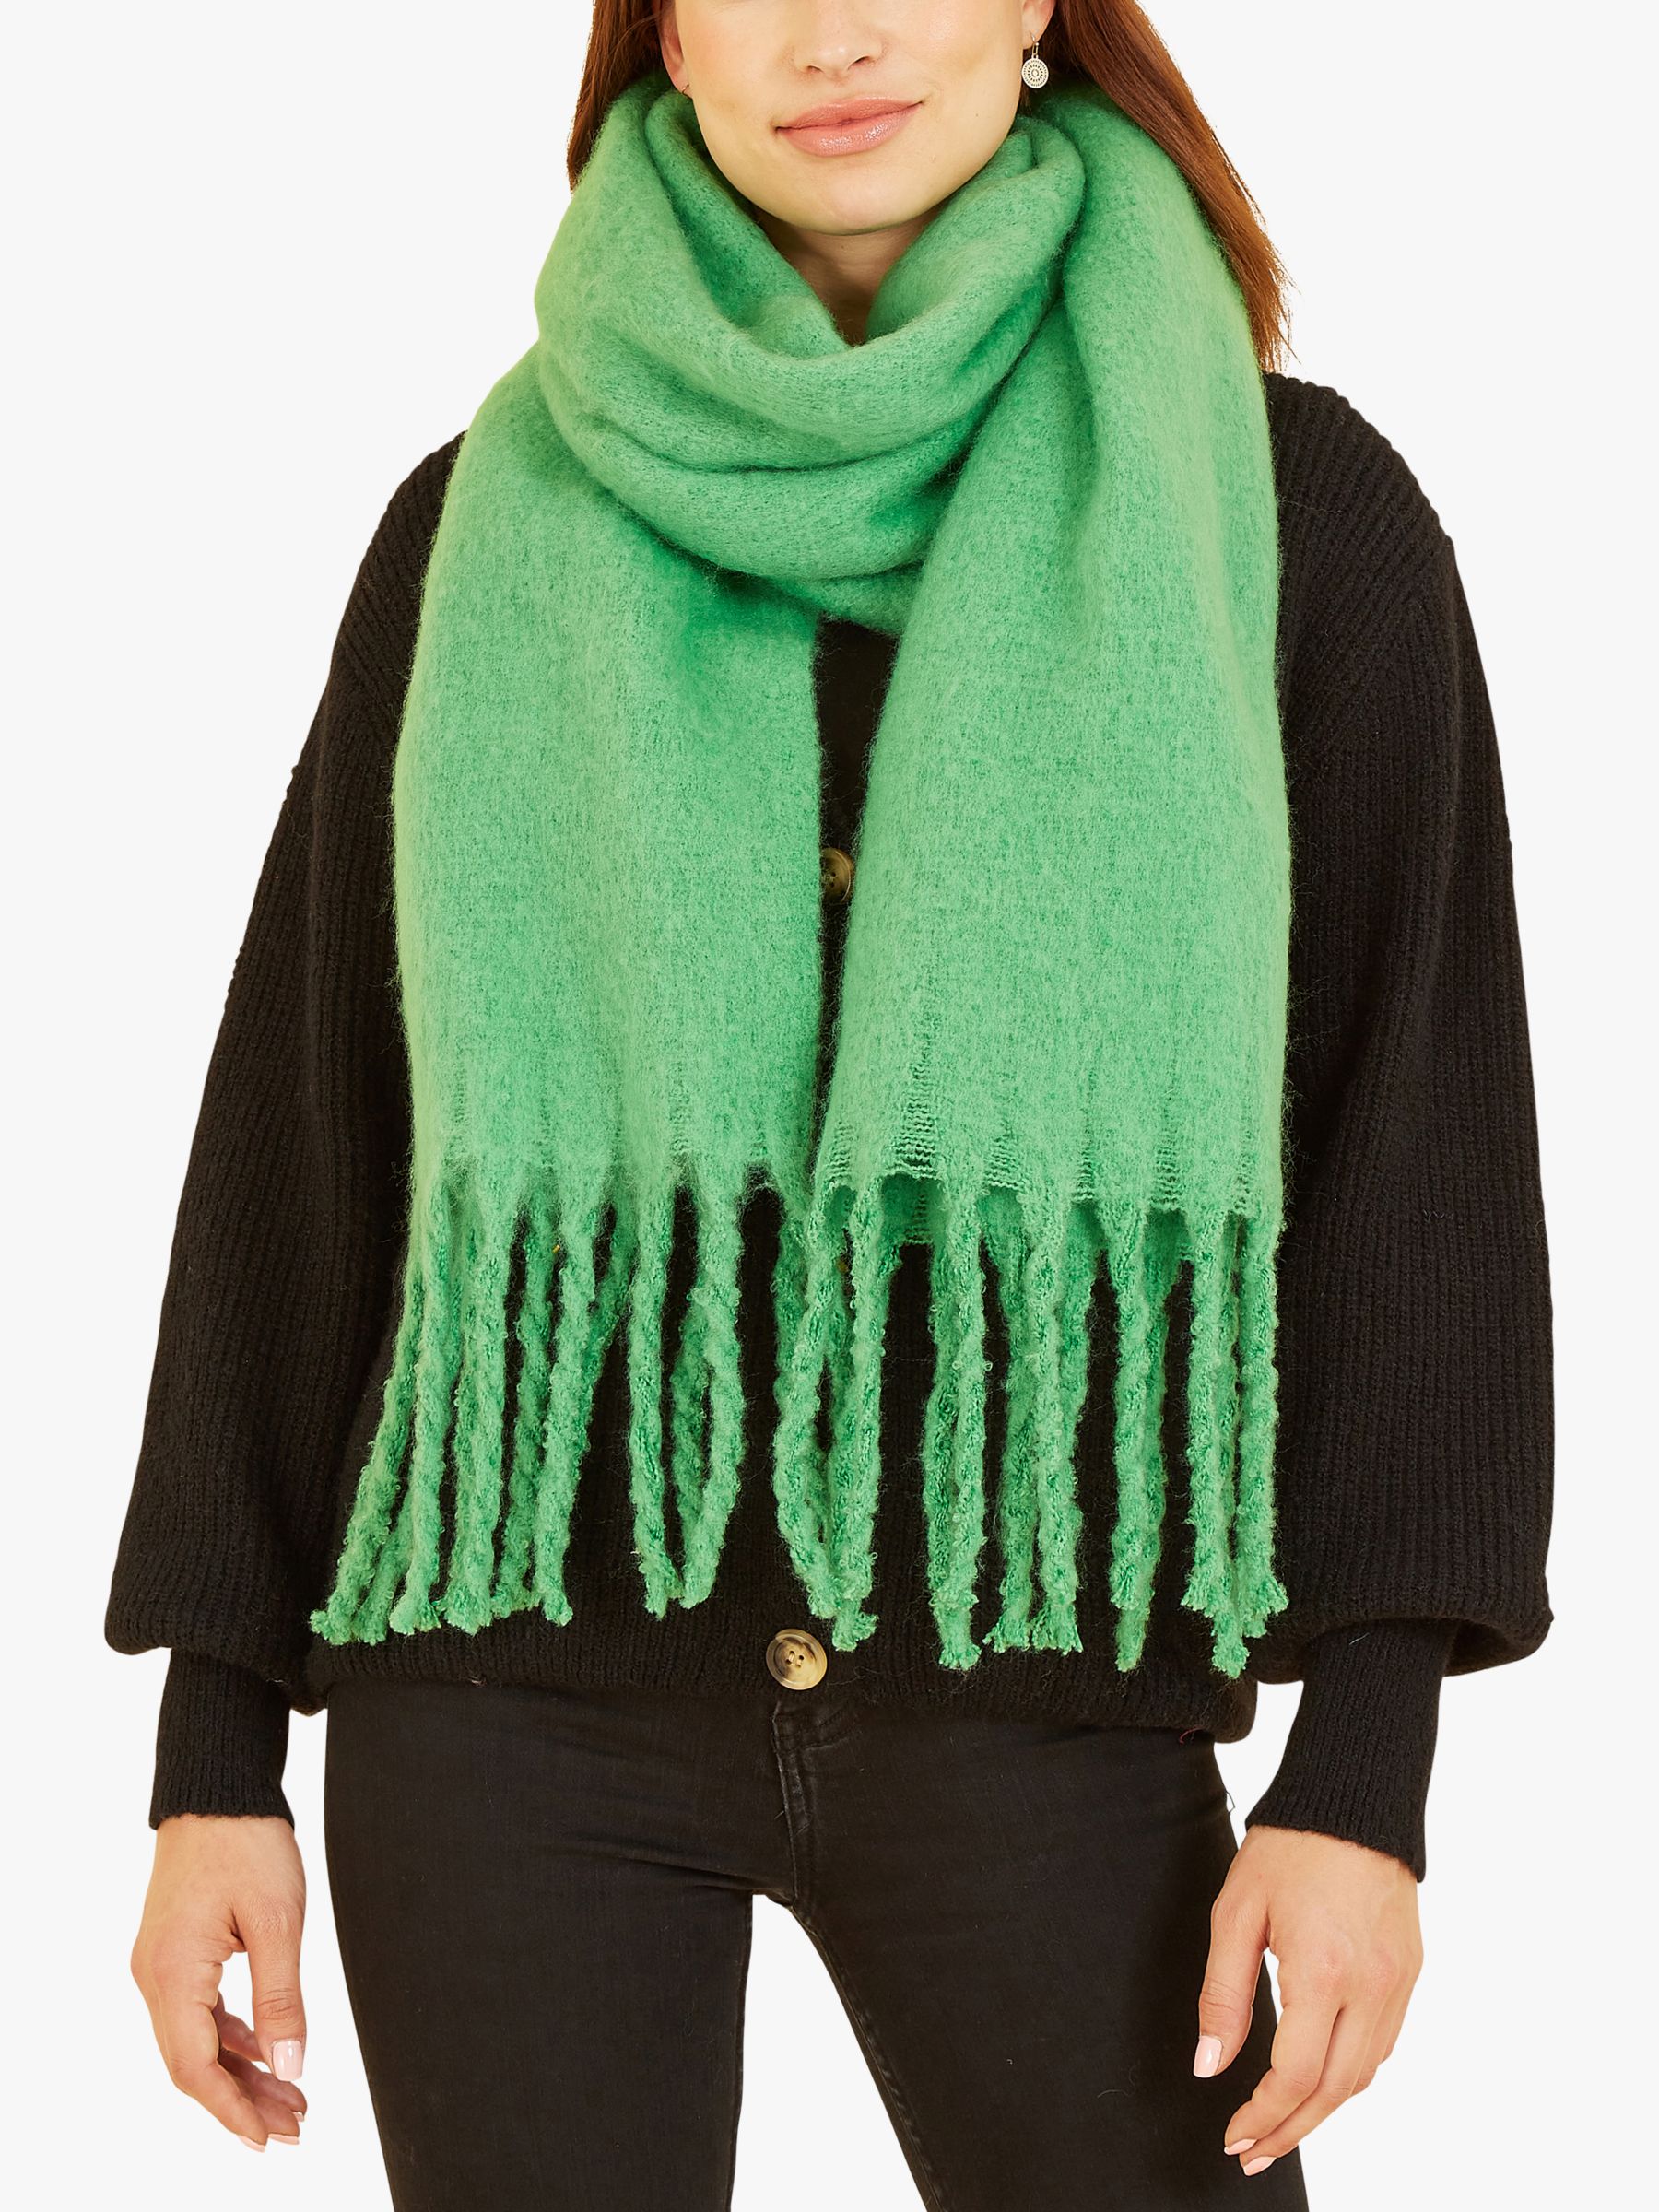 Polka Dot Scarf Shawl in Mustard Olive - Accessories from Yumi UK